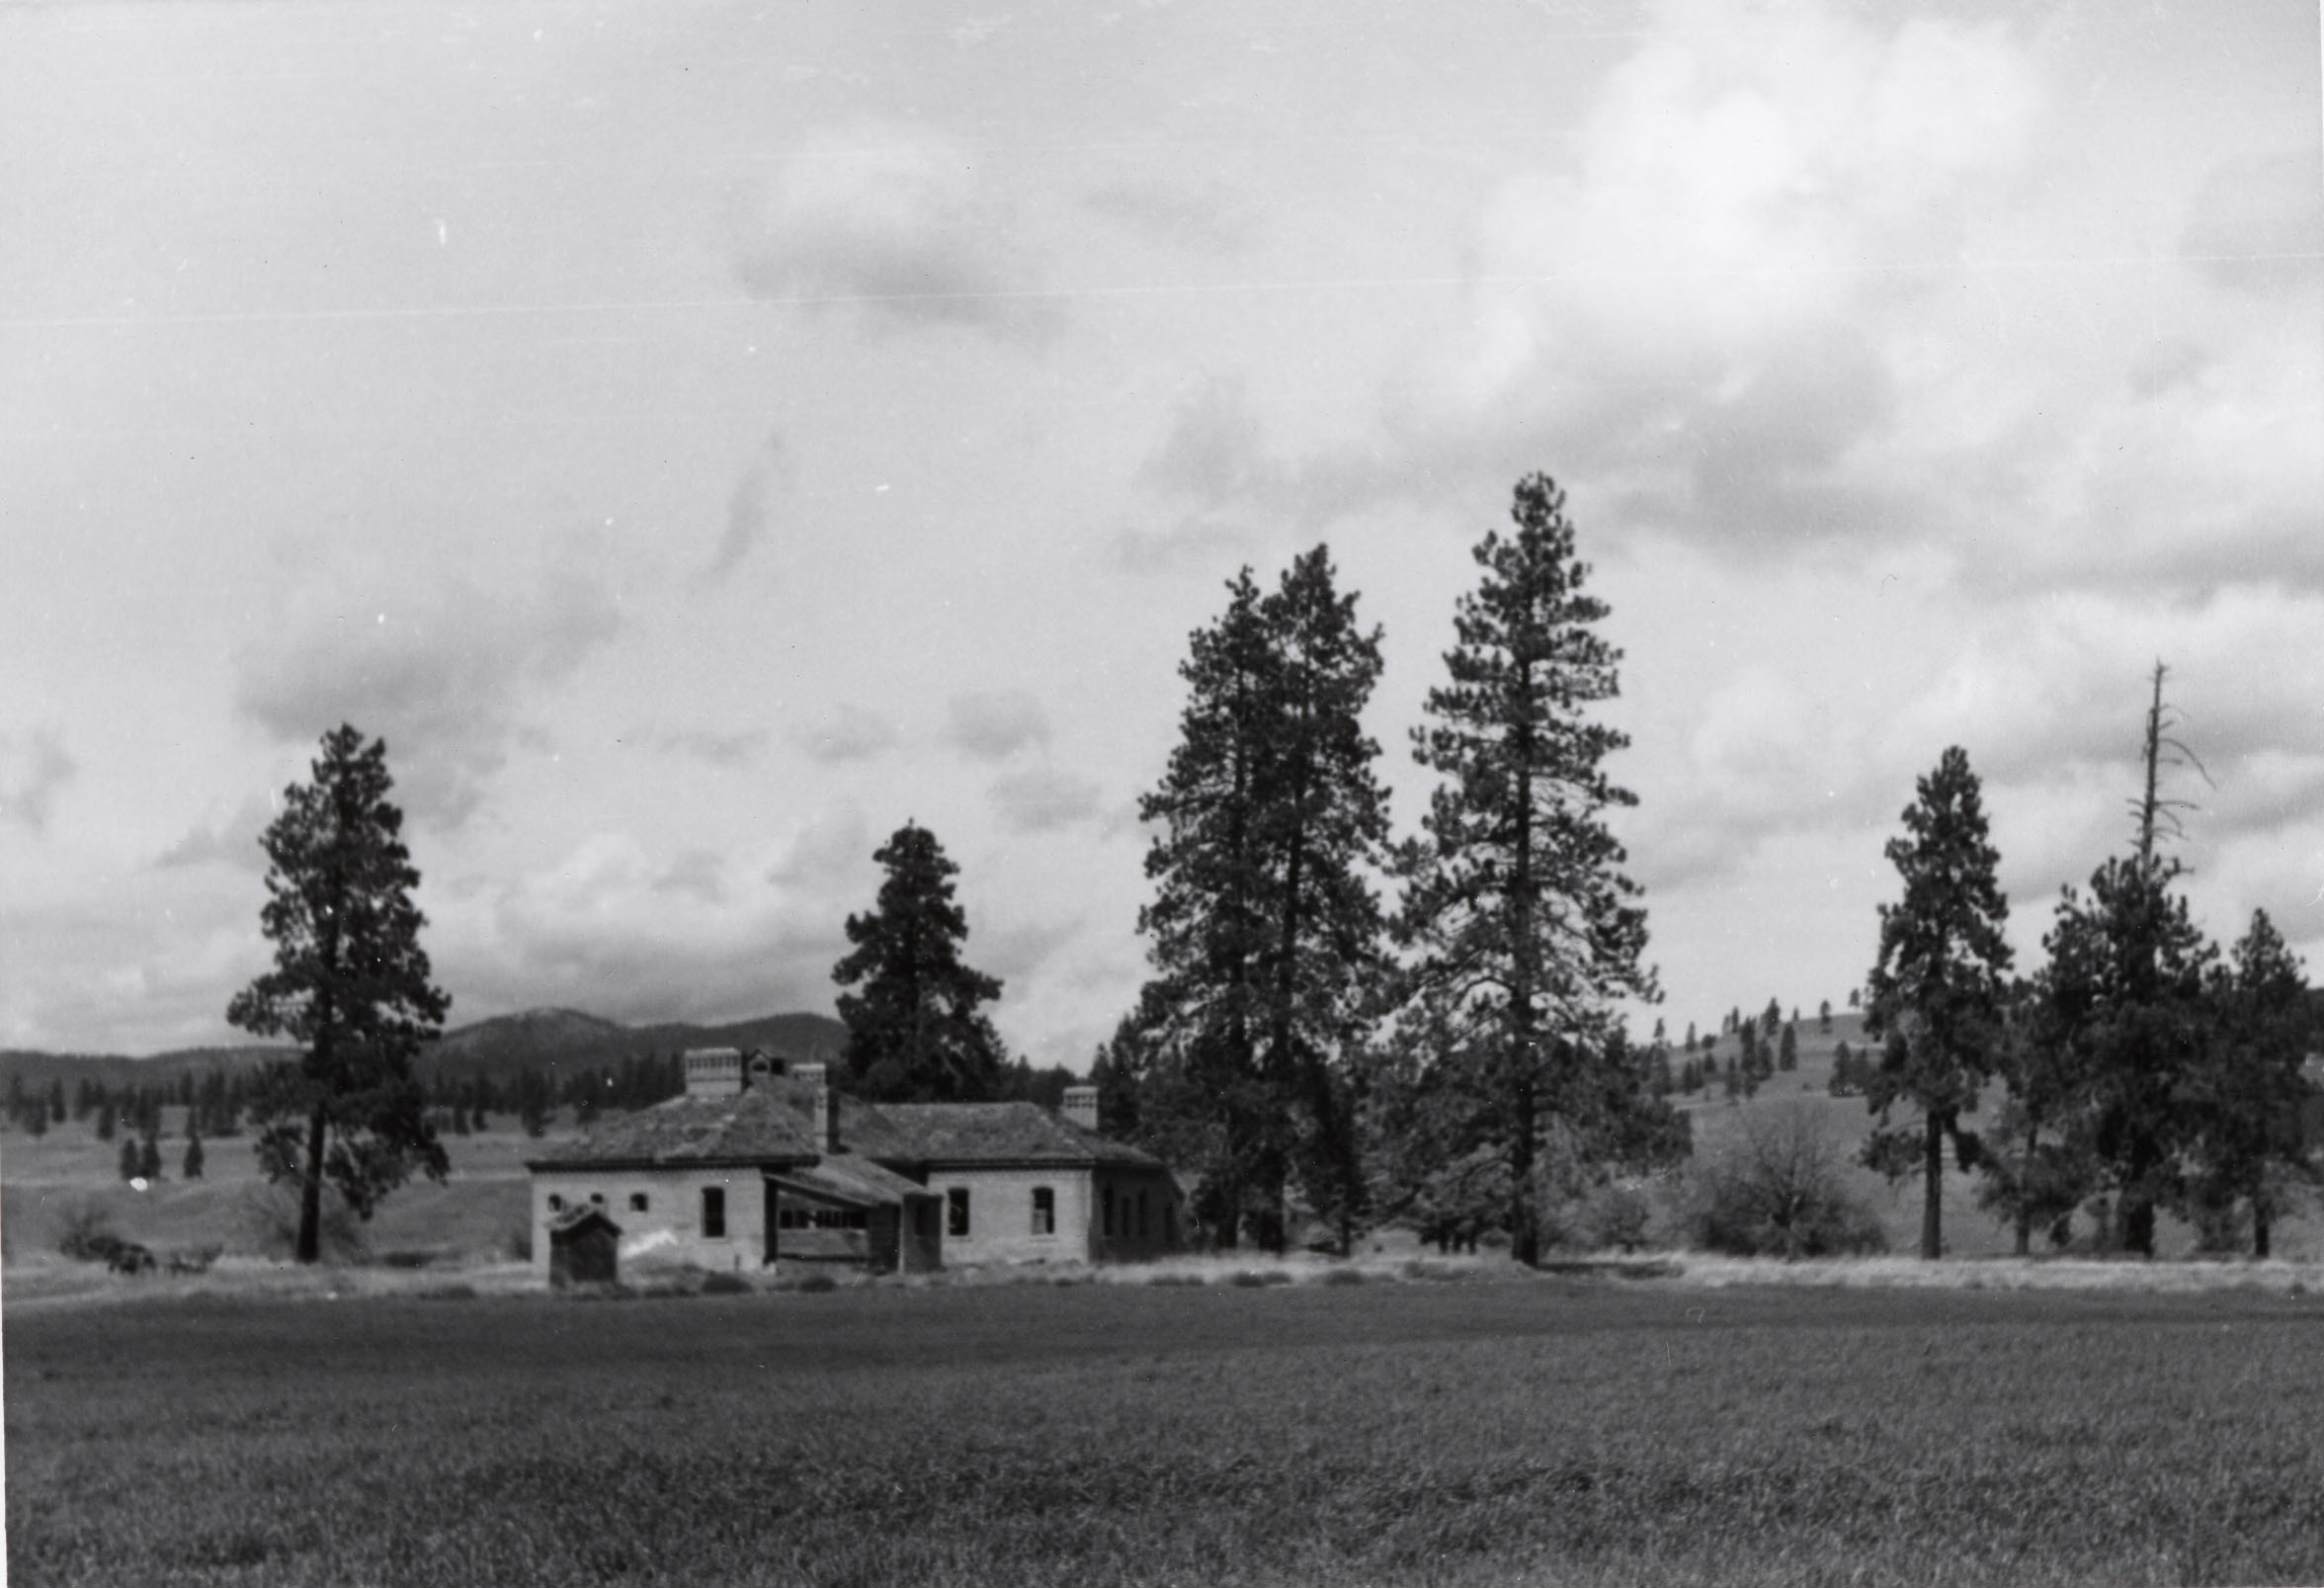 Black and white photograph of a building in a field